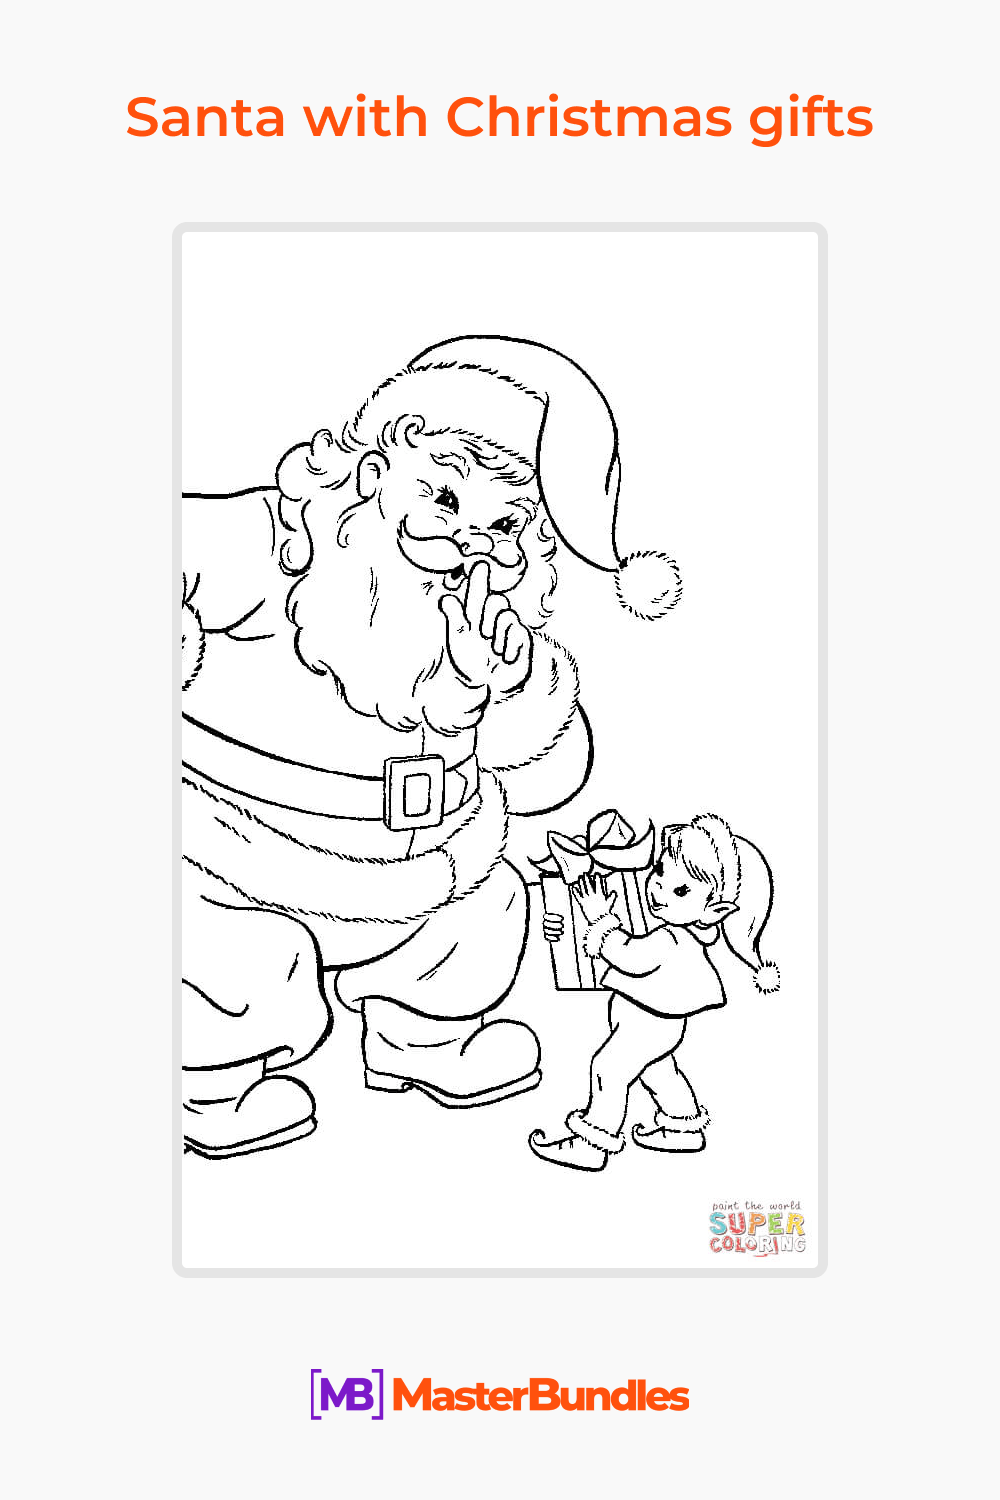 Santa with Christmas gifts coloring page pinterest image.